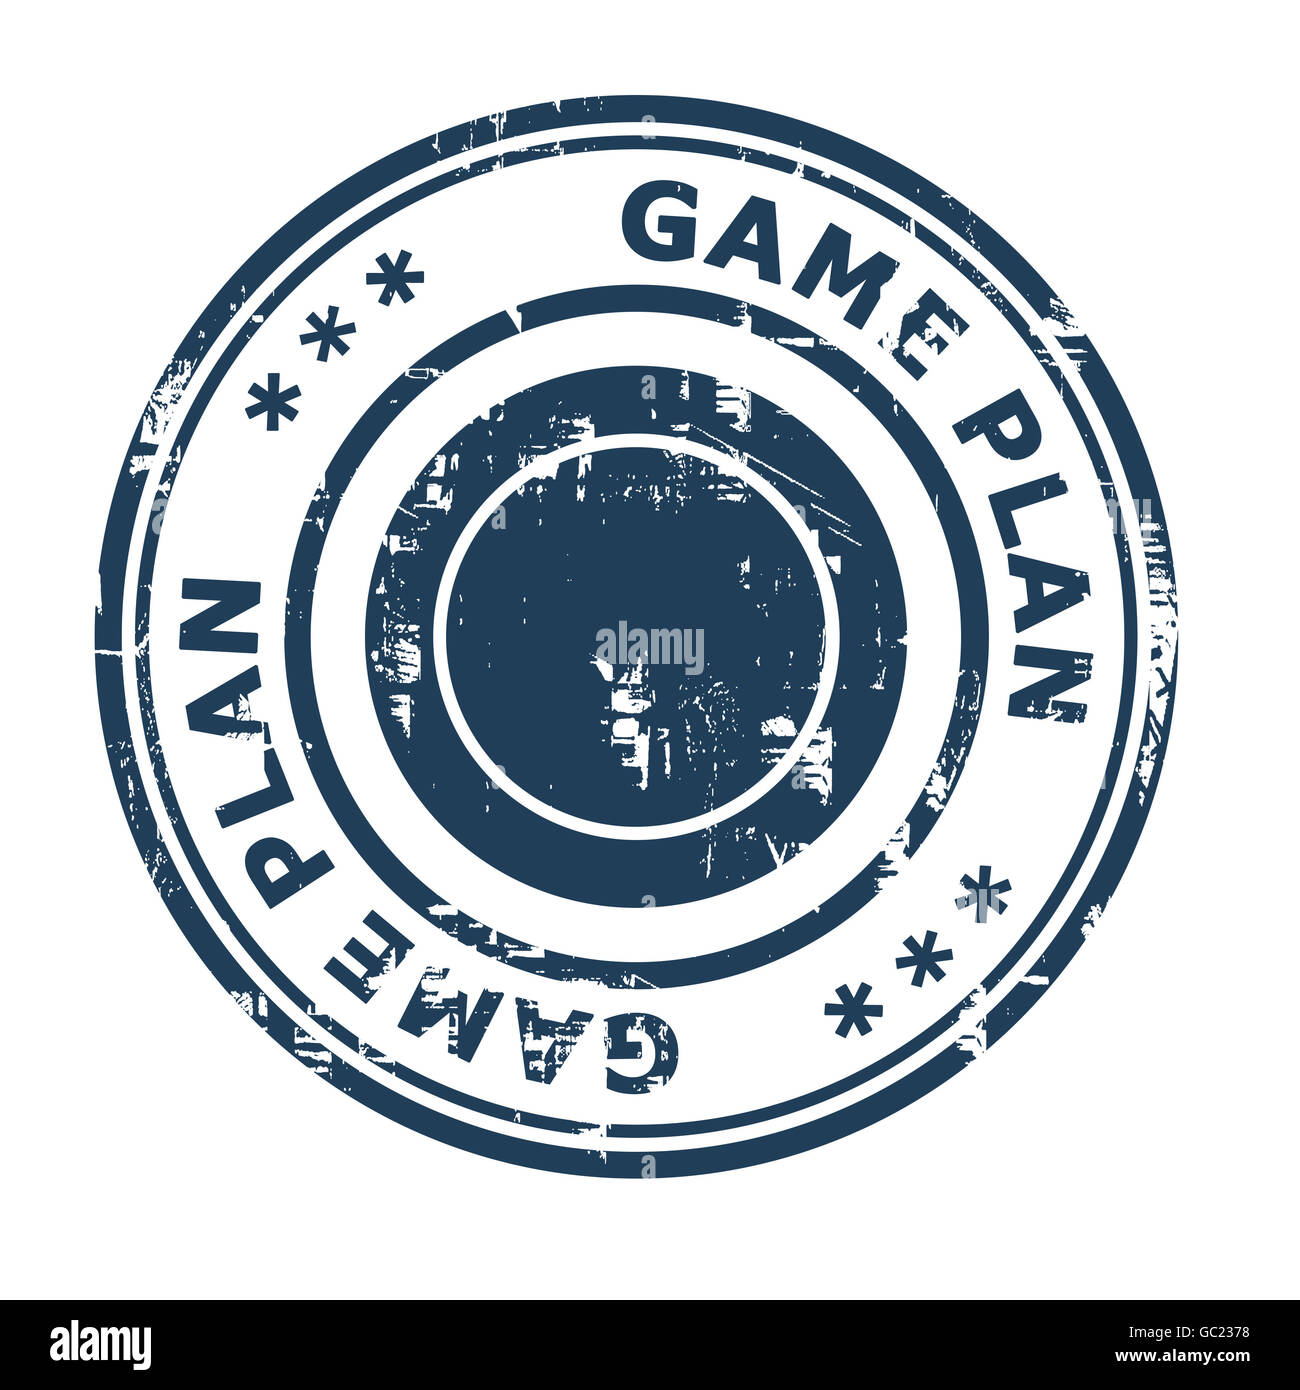 Game Plan business concept rubber stamp isolated on a white background. Stock Photo